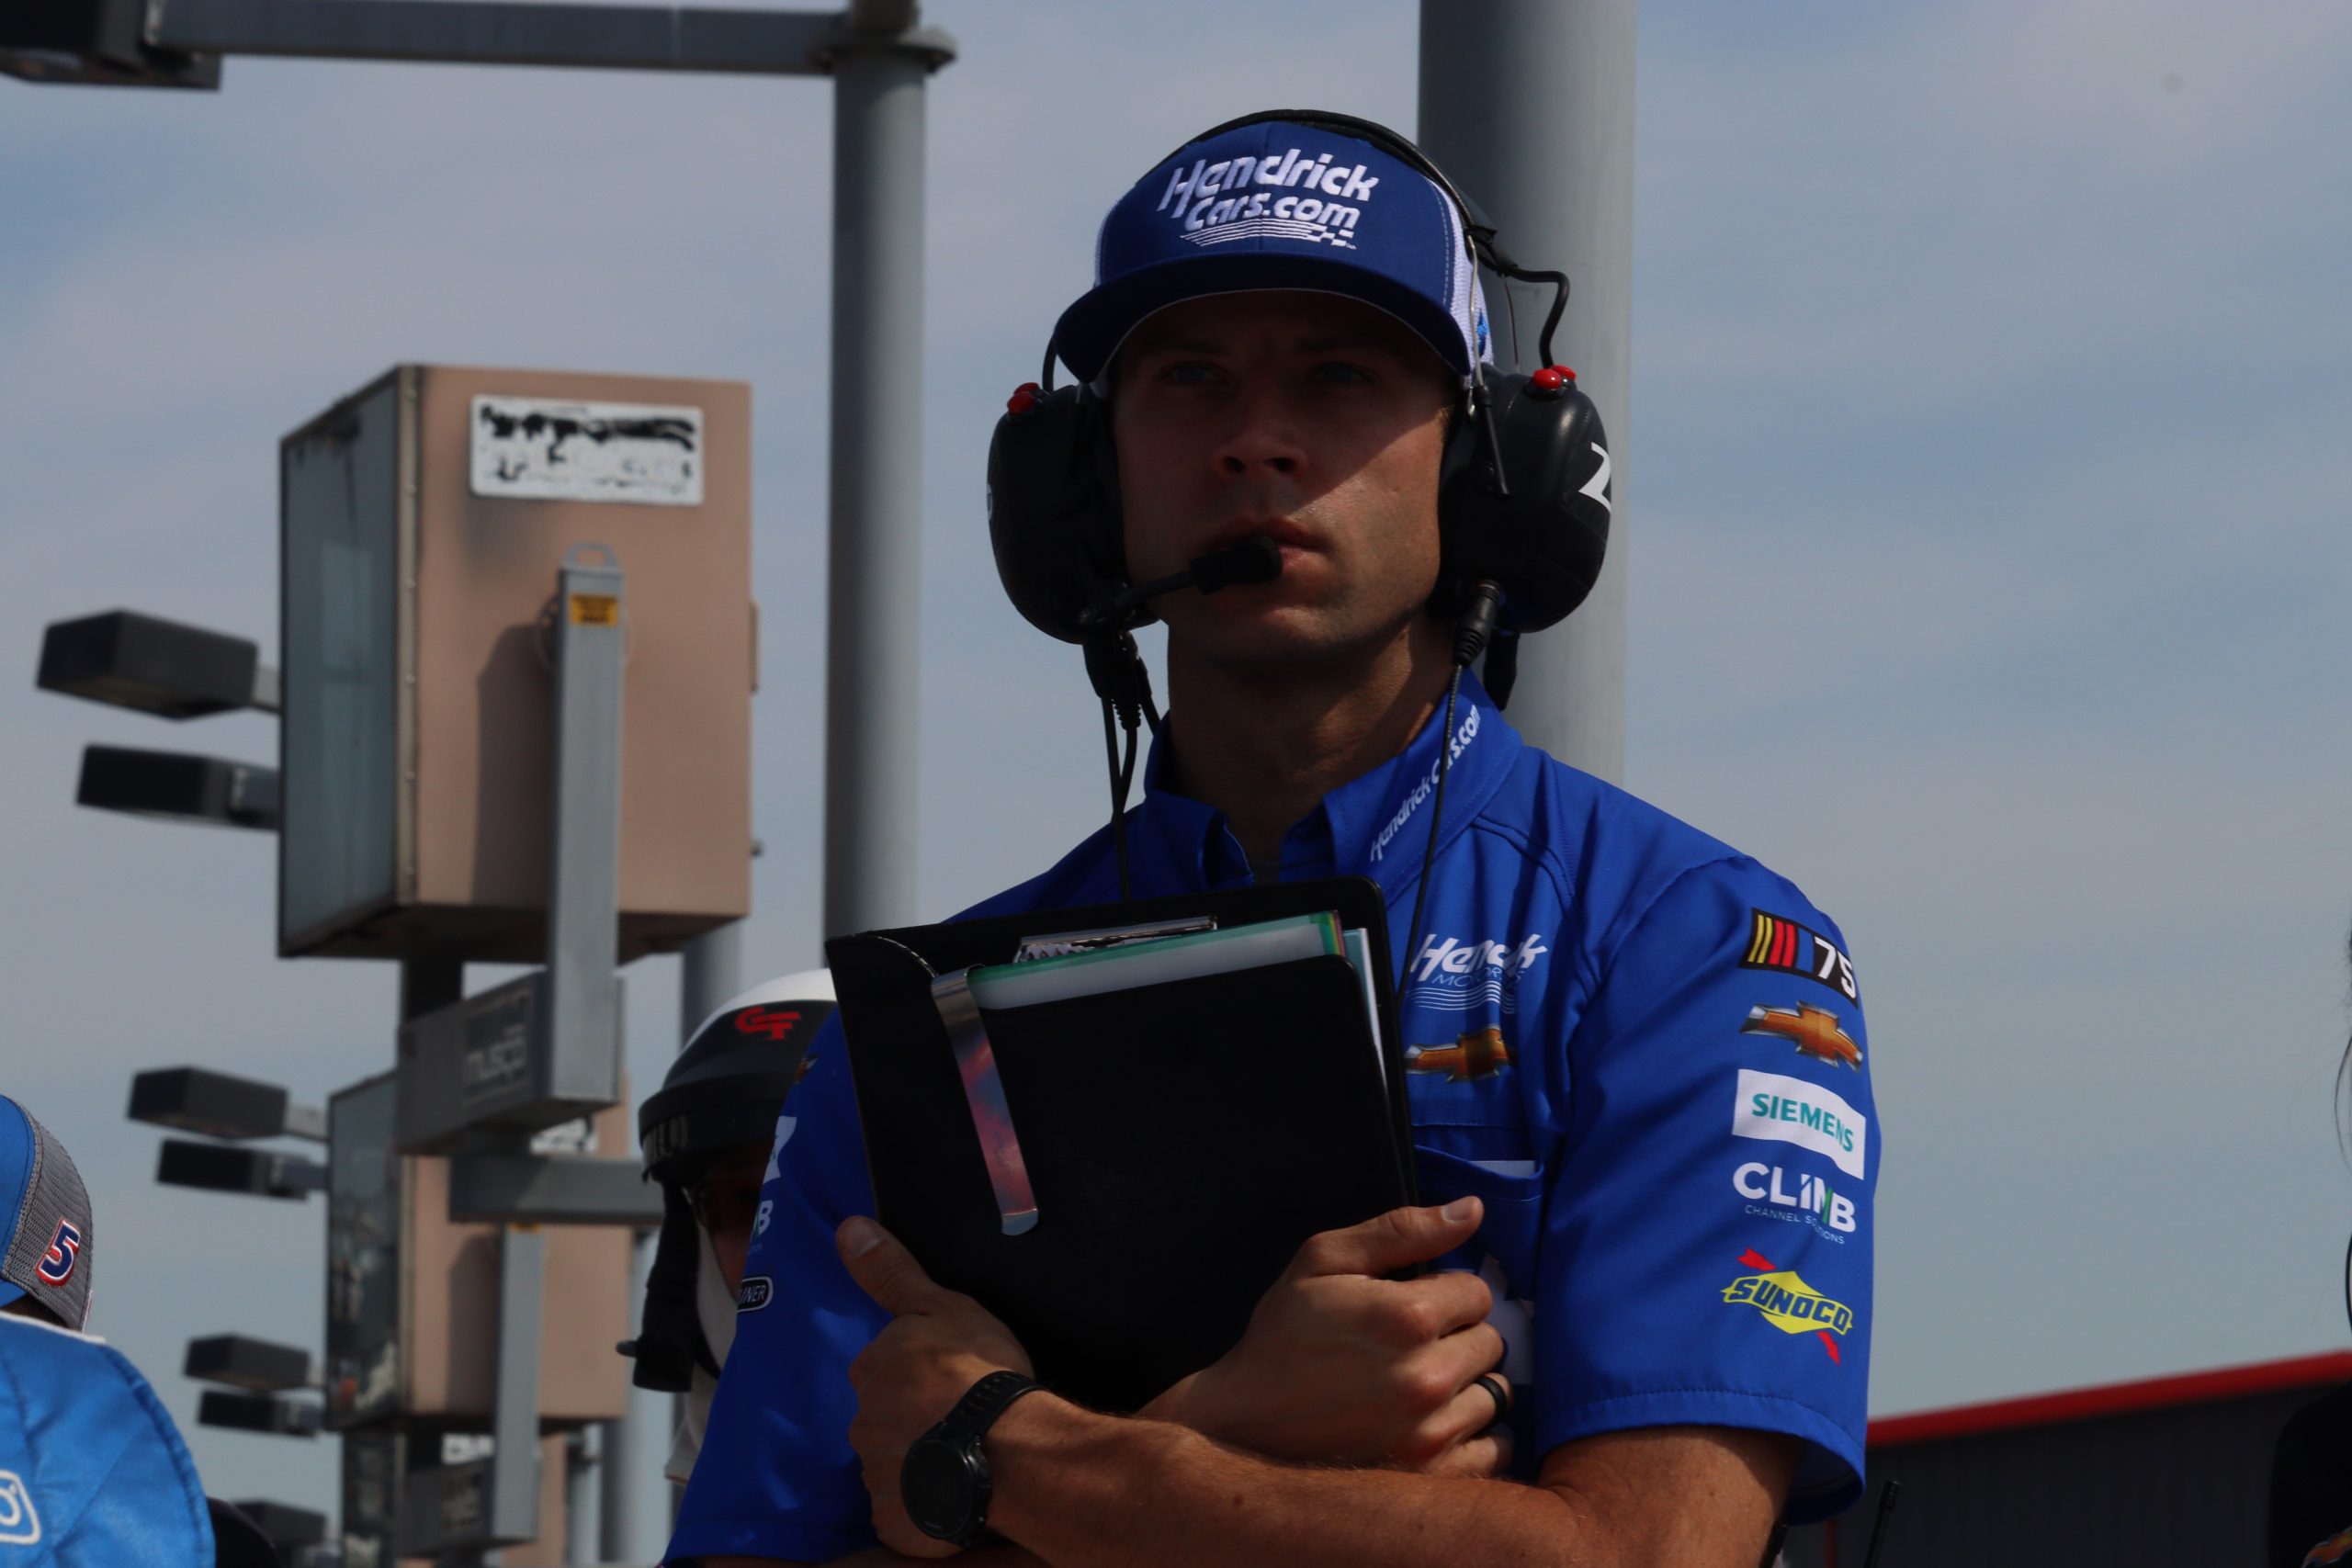 Daniels pays attention every single detail each race weekend like Ray Evernham. (Photo: Bobby Krug | The Podium Finish)